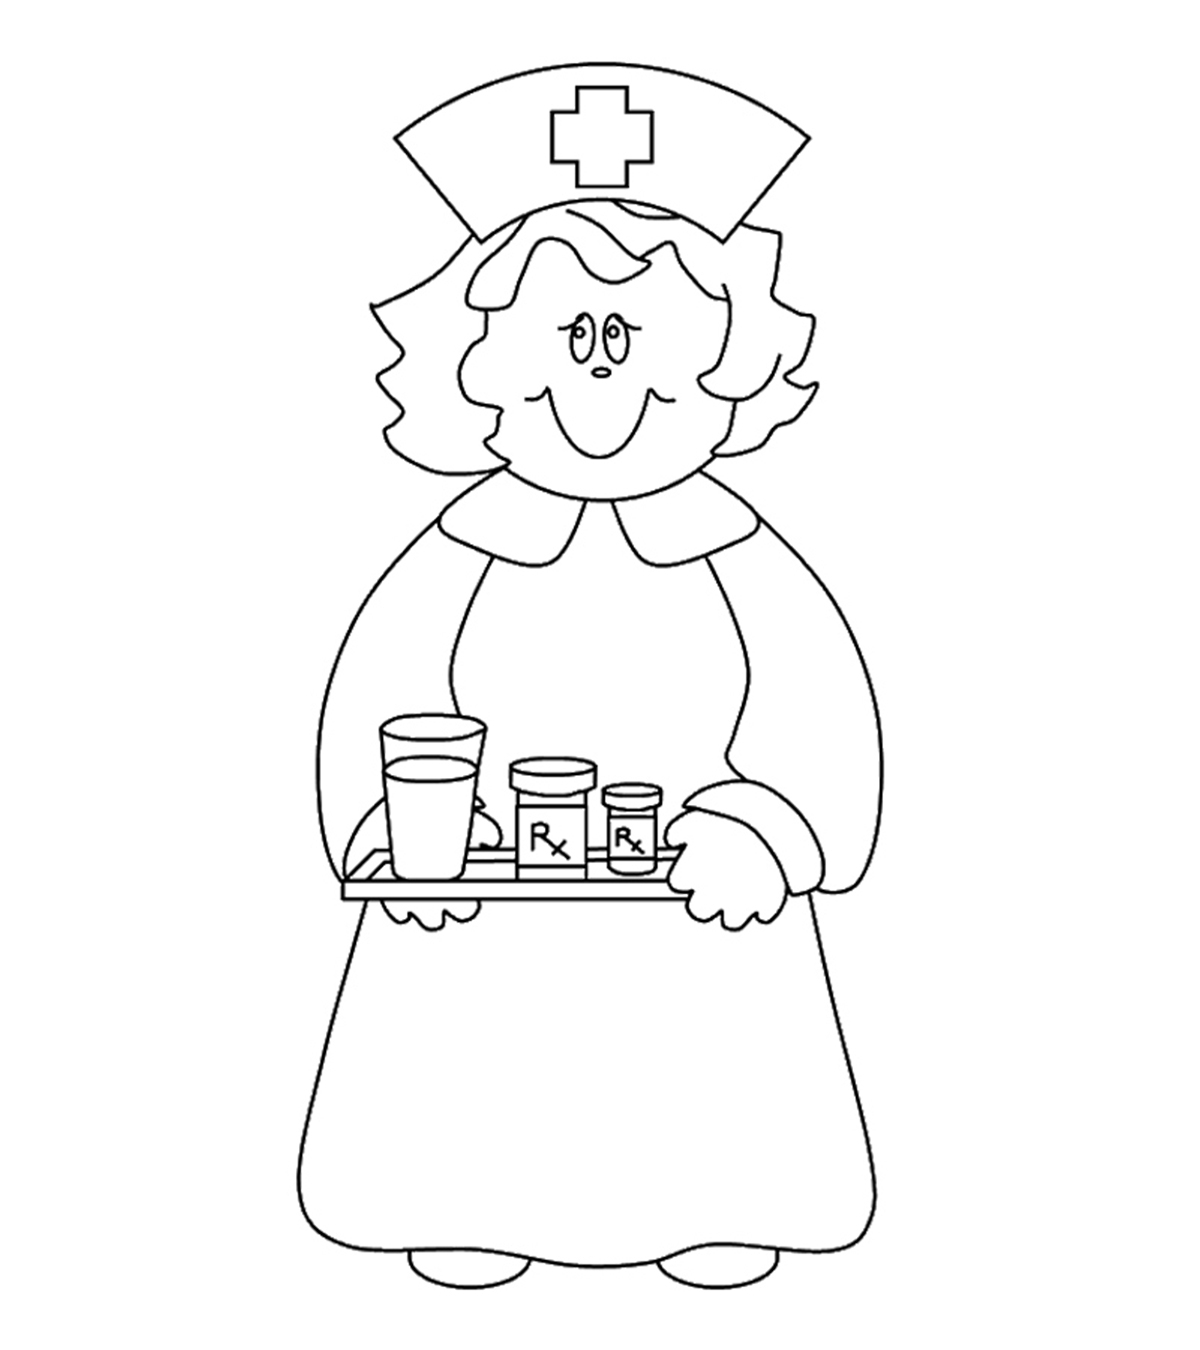 Nursing Coloring Pages Coloring Pages And Books Male Nurse Coloring Pagesntable For Kids